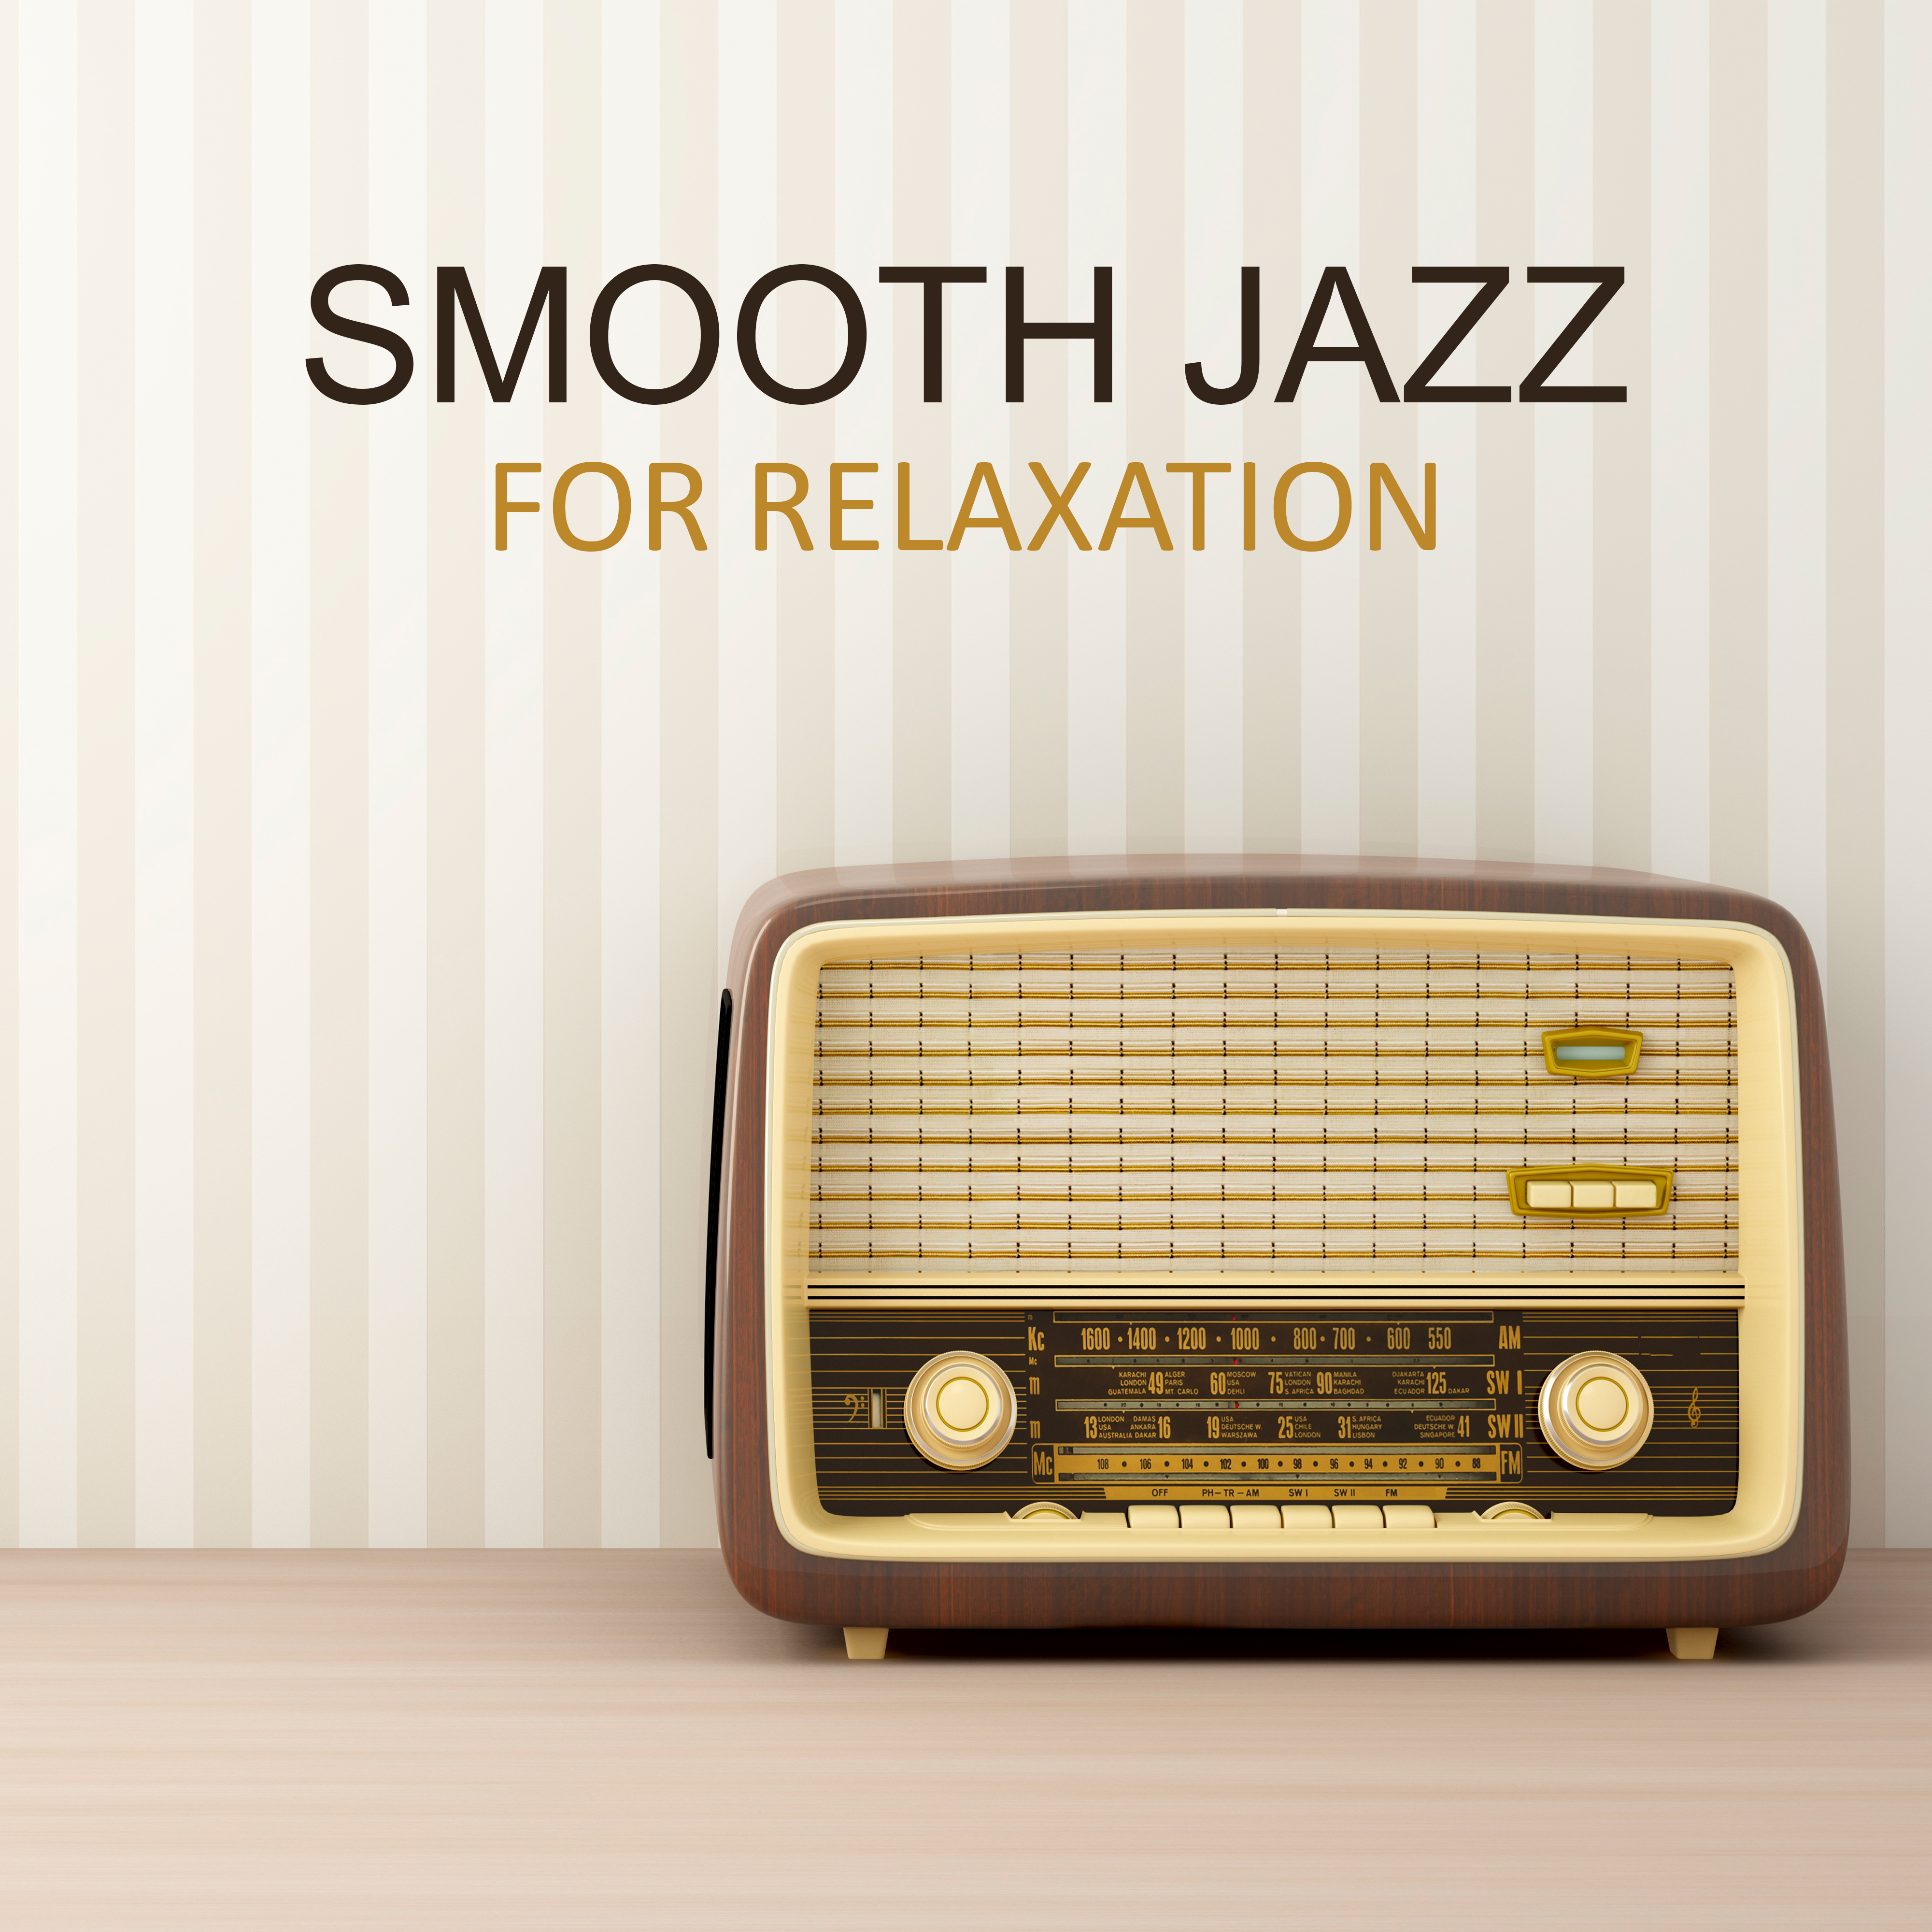 Smooth Jazz for Relaxation